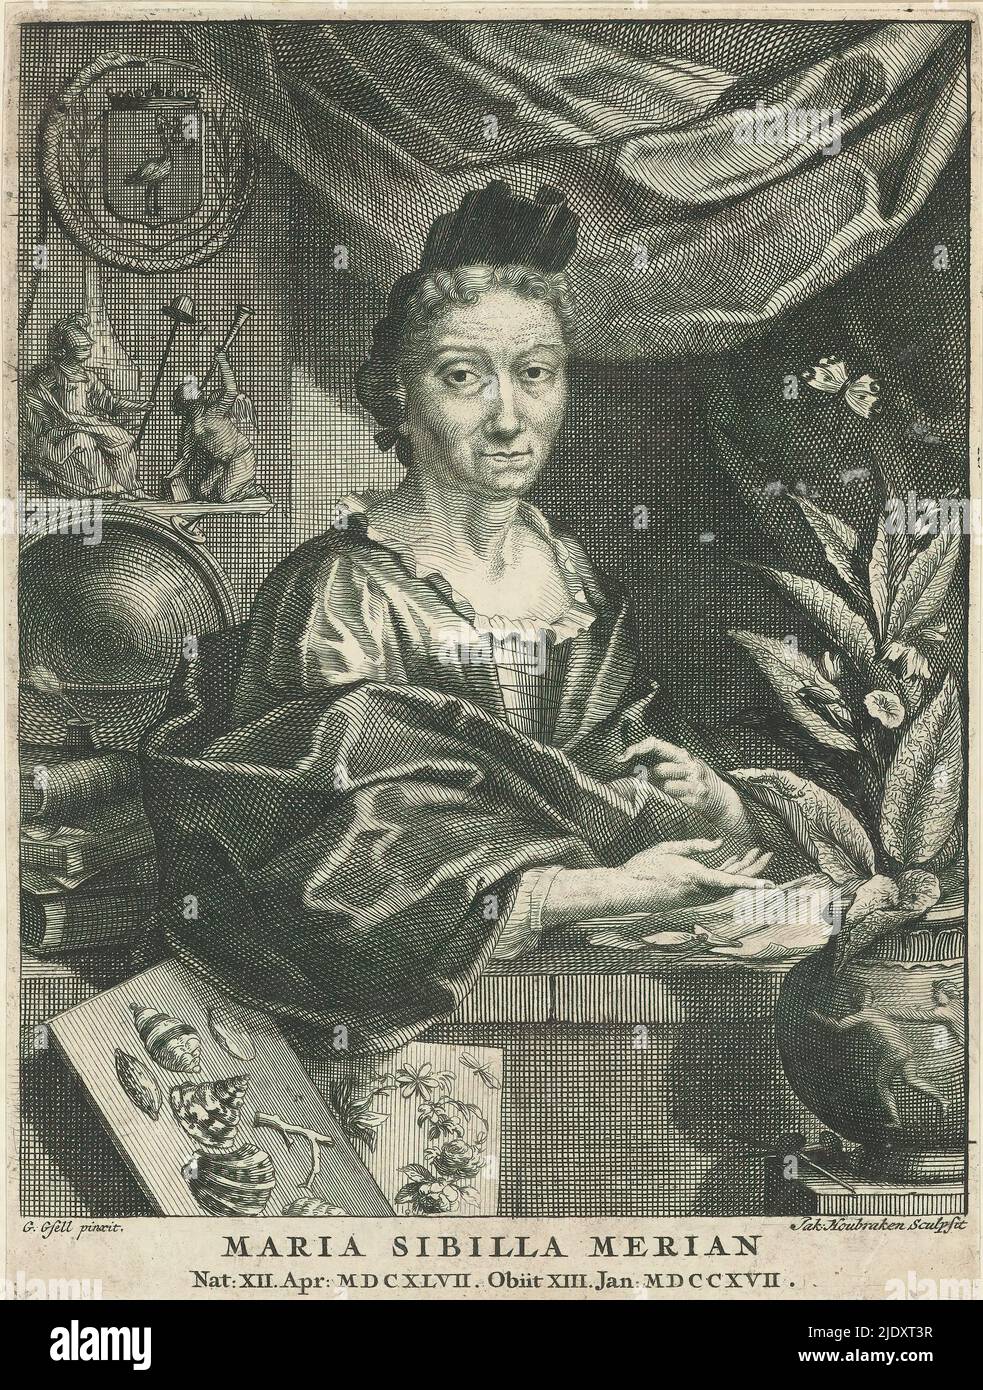 Portrait of Maria Sibylla Merian, Behind Maria Sibylla Merian a personification of the struggle with a tree of freedom (Dutch virgin). On the wall the coat of arms of The Hague. In the foreground shells and plants. Text in Latin in the lower margin. Print is part of an album., print maker: Jacob Houbraken, (mentioned on object), after painting by: Georg Gsell, (mentioned on object), 1708 - 1780, paper, etching, engraving, height 165 mm × width 124 mm Stock Photo